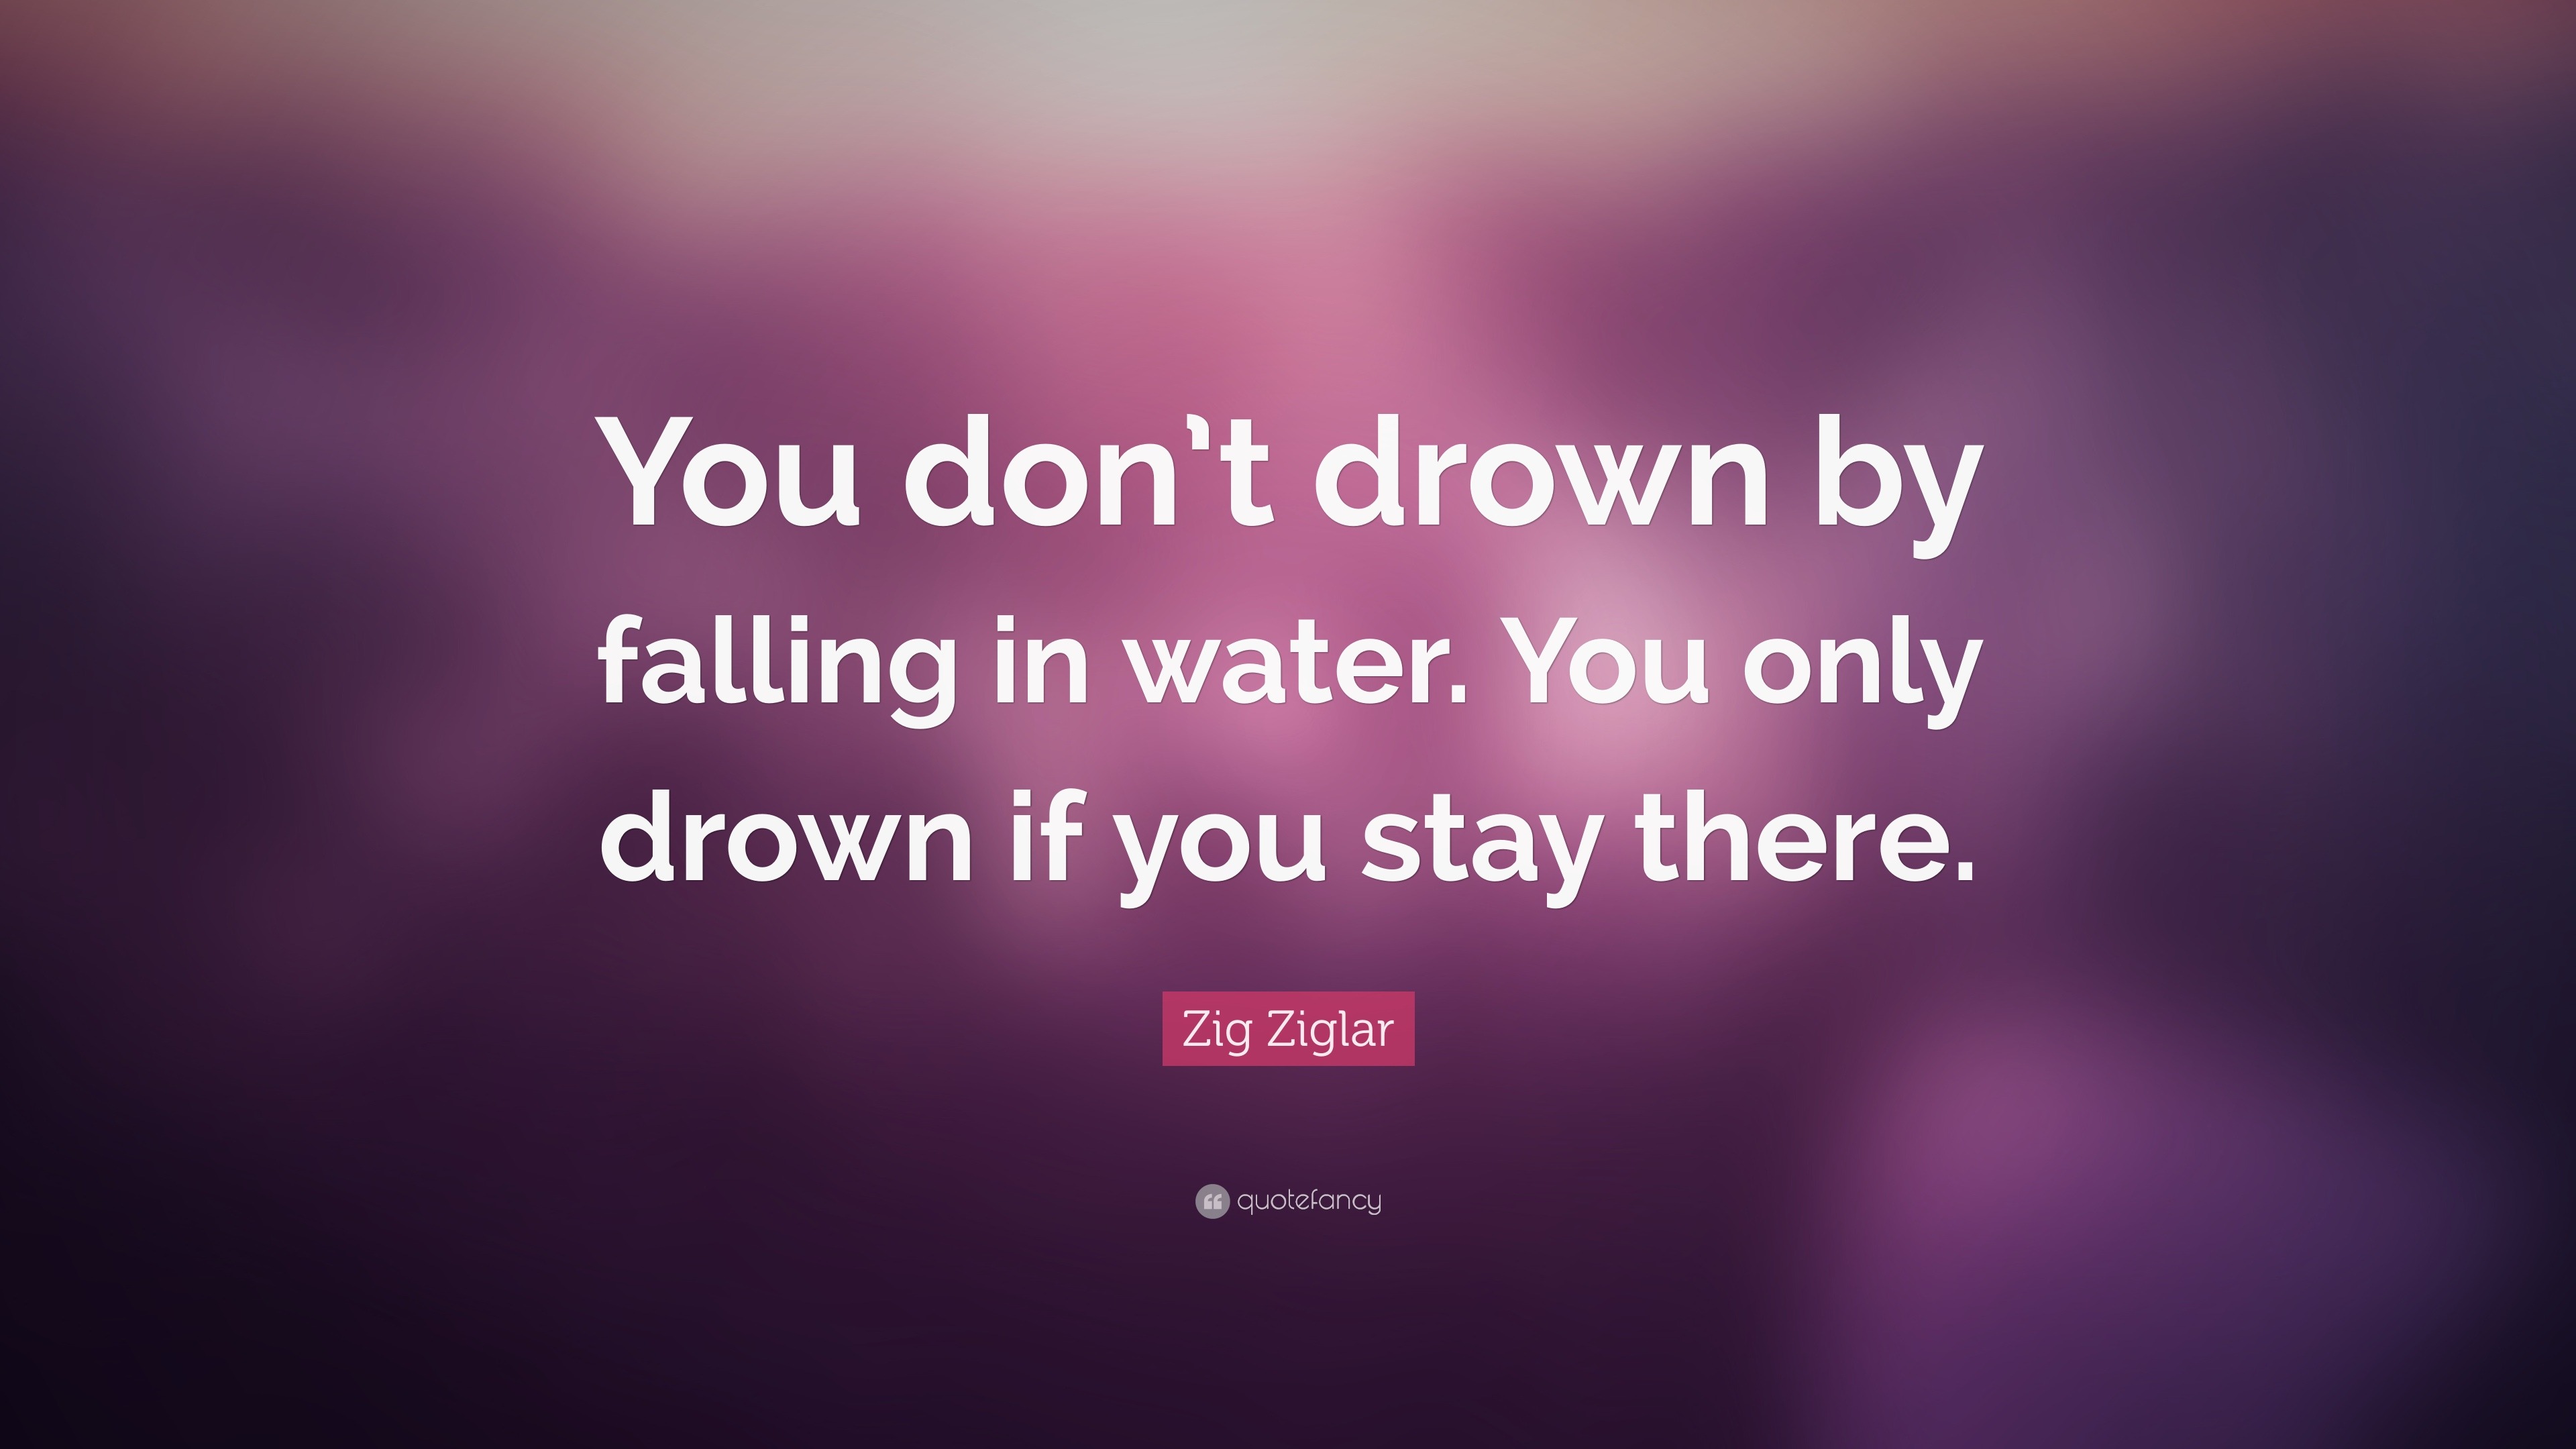 Zig Ziglar Quote: “You don’t drown by falling in water. You only drown ...